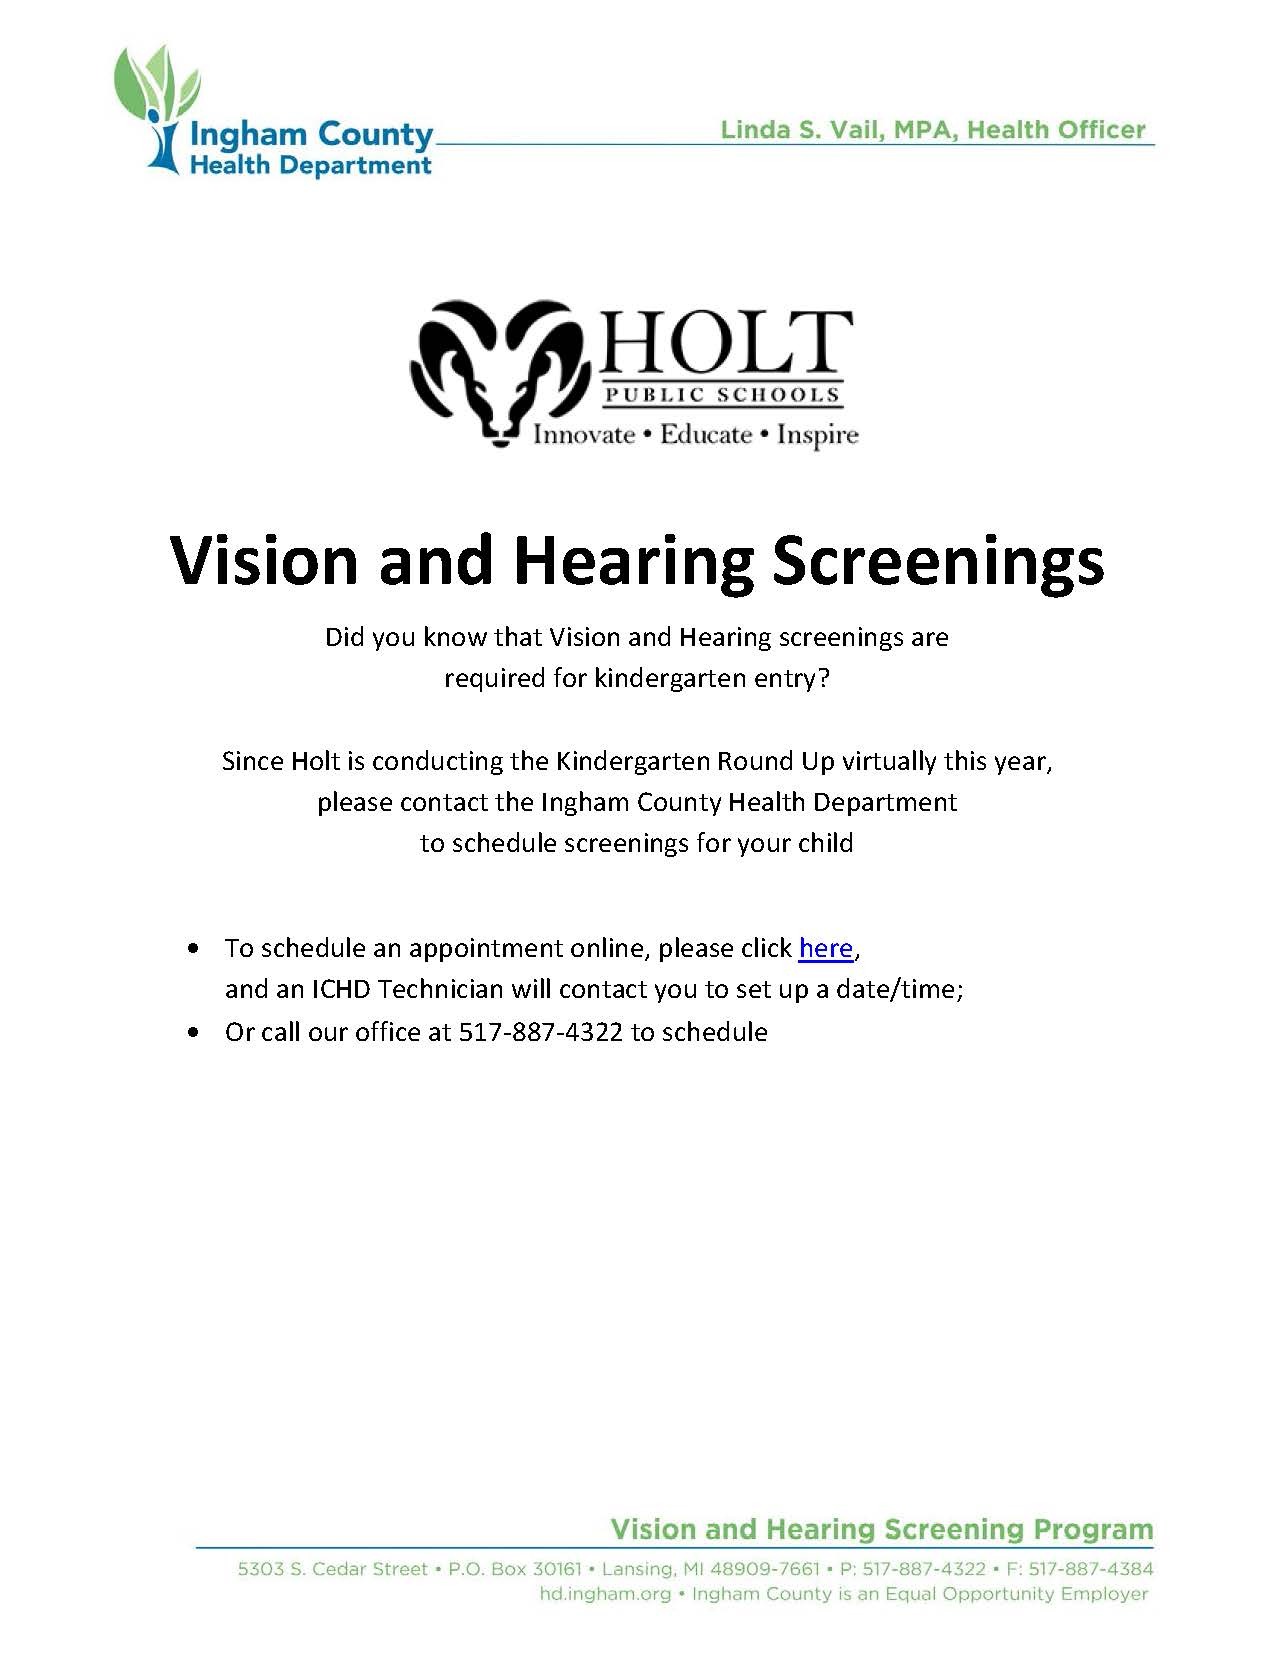 Vision and Hearing Screenings - Did you know that Vision and Hearing screenings are required for kindergarten entry? Since Holt is conducting the Kindergarten Round Up virtually this year,  please contact the Ingham County Health Department to schedule screenings for your child. To schedule an appointment online, please click here,  and an ICHD Technician will contact you to set up a date/time; Or call our office at 517-887-4322 to schedule